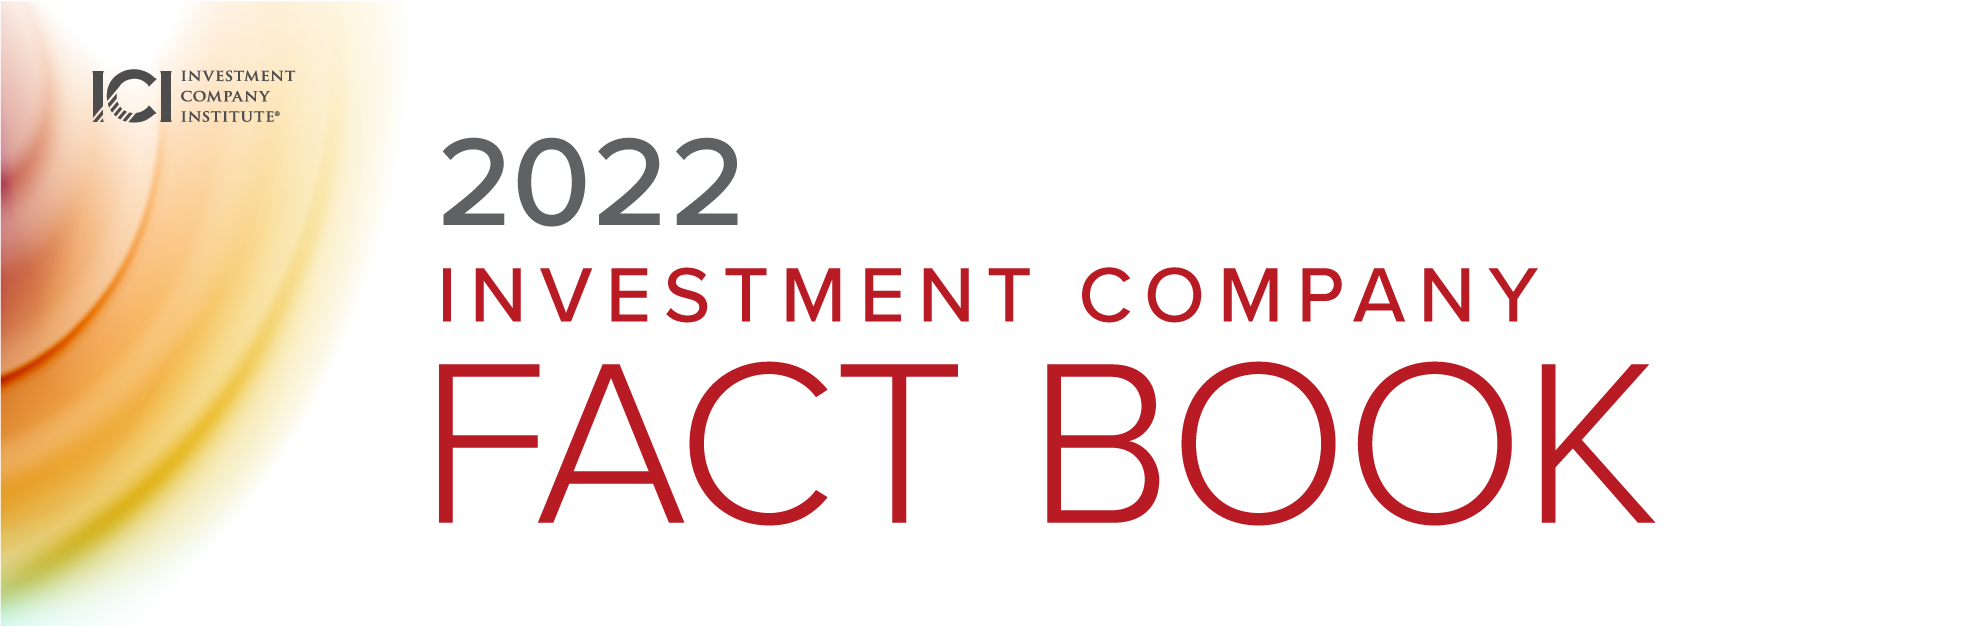 2022 Investment Company Fact Book